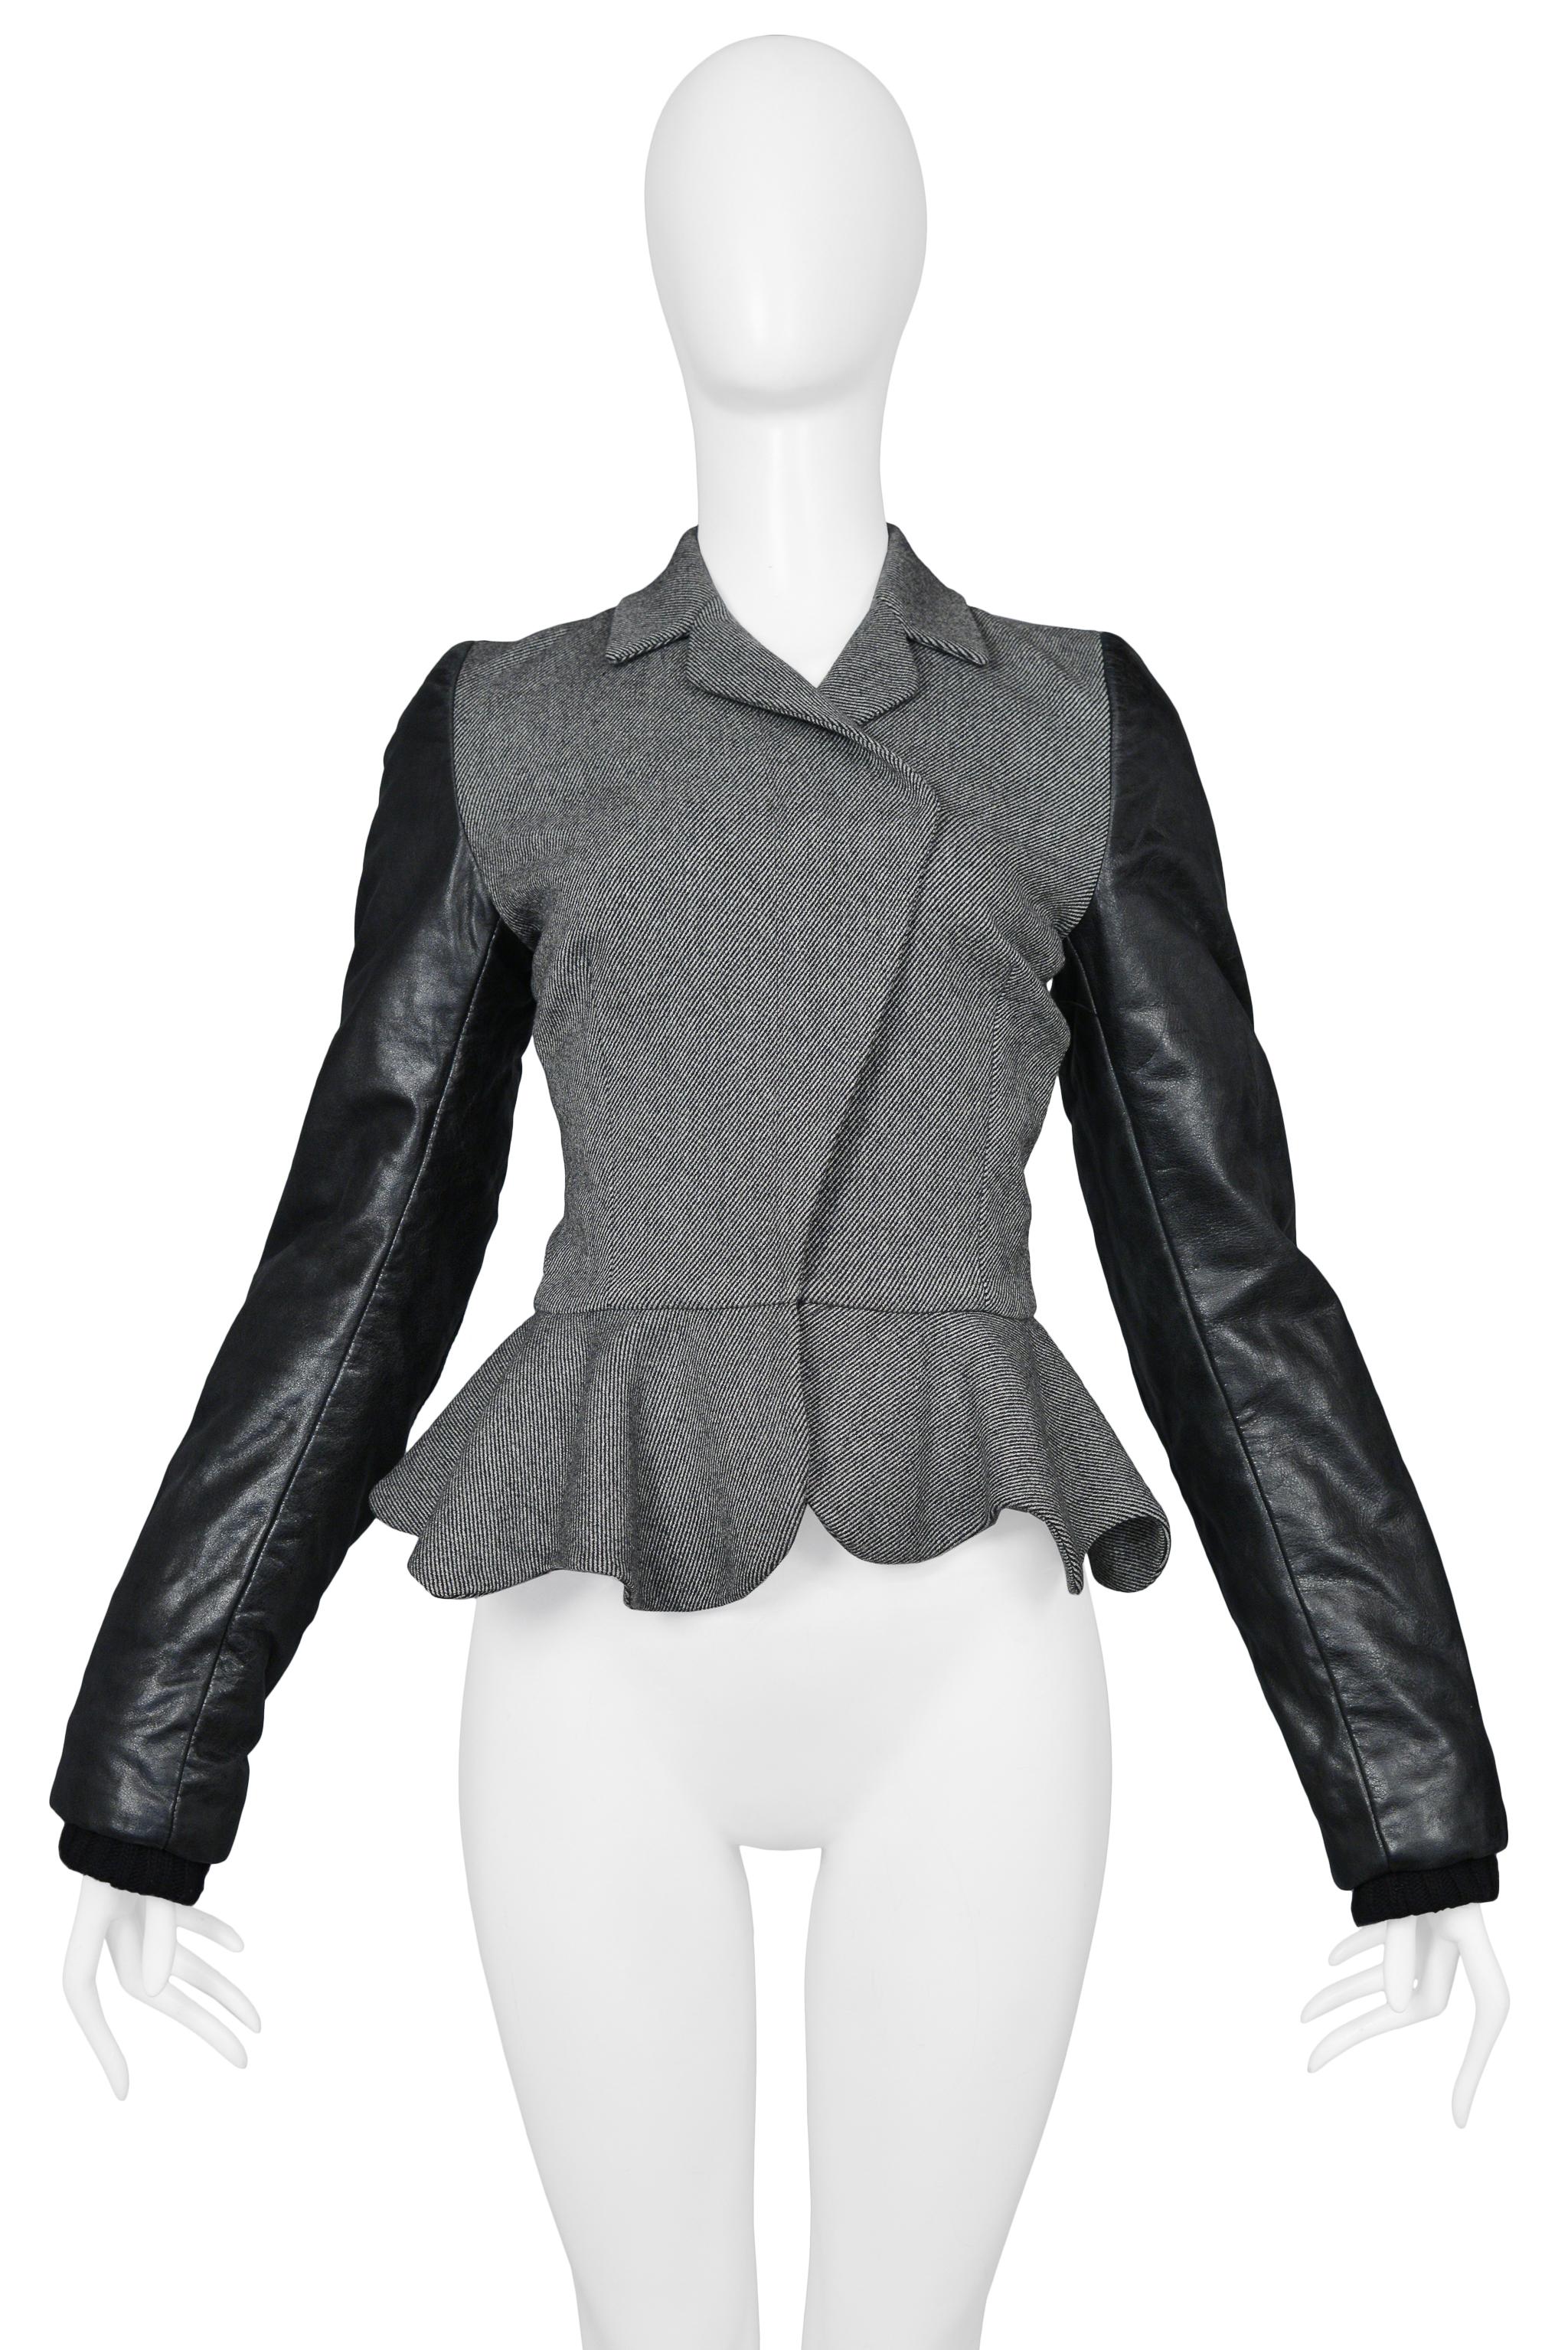 Resurrection is pleased to offer a vintage Balenciaga by Nicolas Ghesquiere grey wool jacket featuring black leather motorcycle style long sleeves, a fitted body, notch collar, and peplum. 

Balenciaga Paris
Designed By Nicolas Ghesquiere
Size